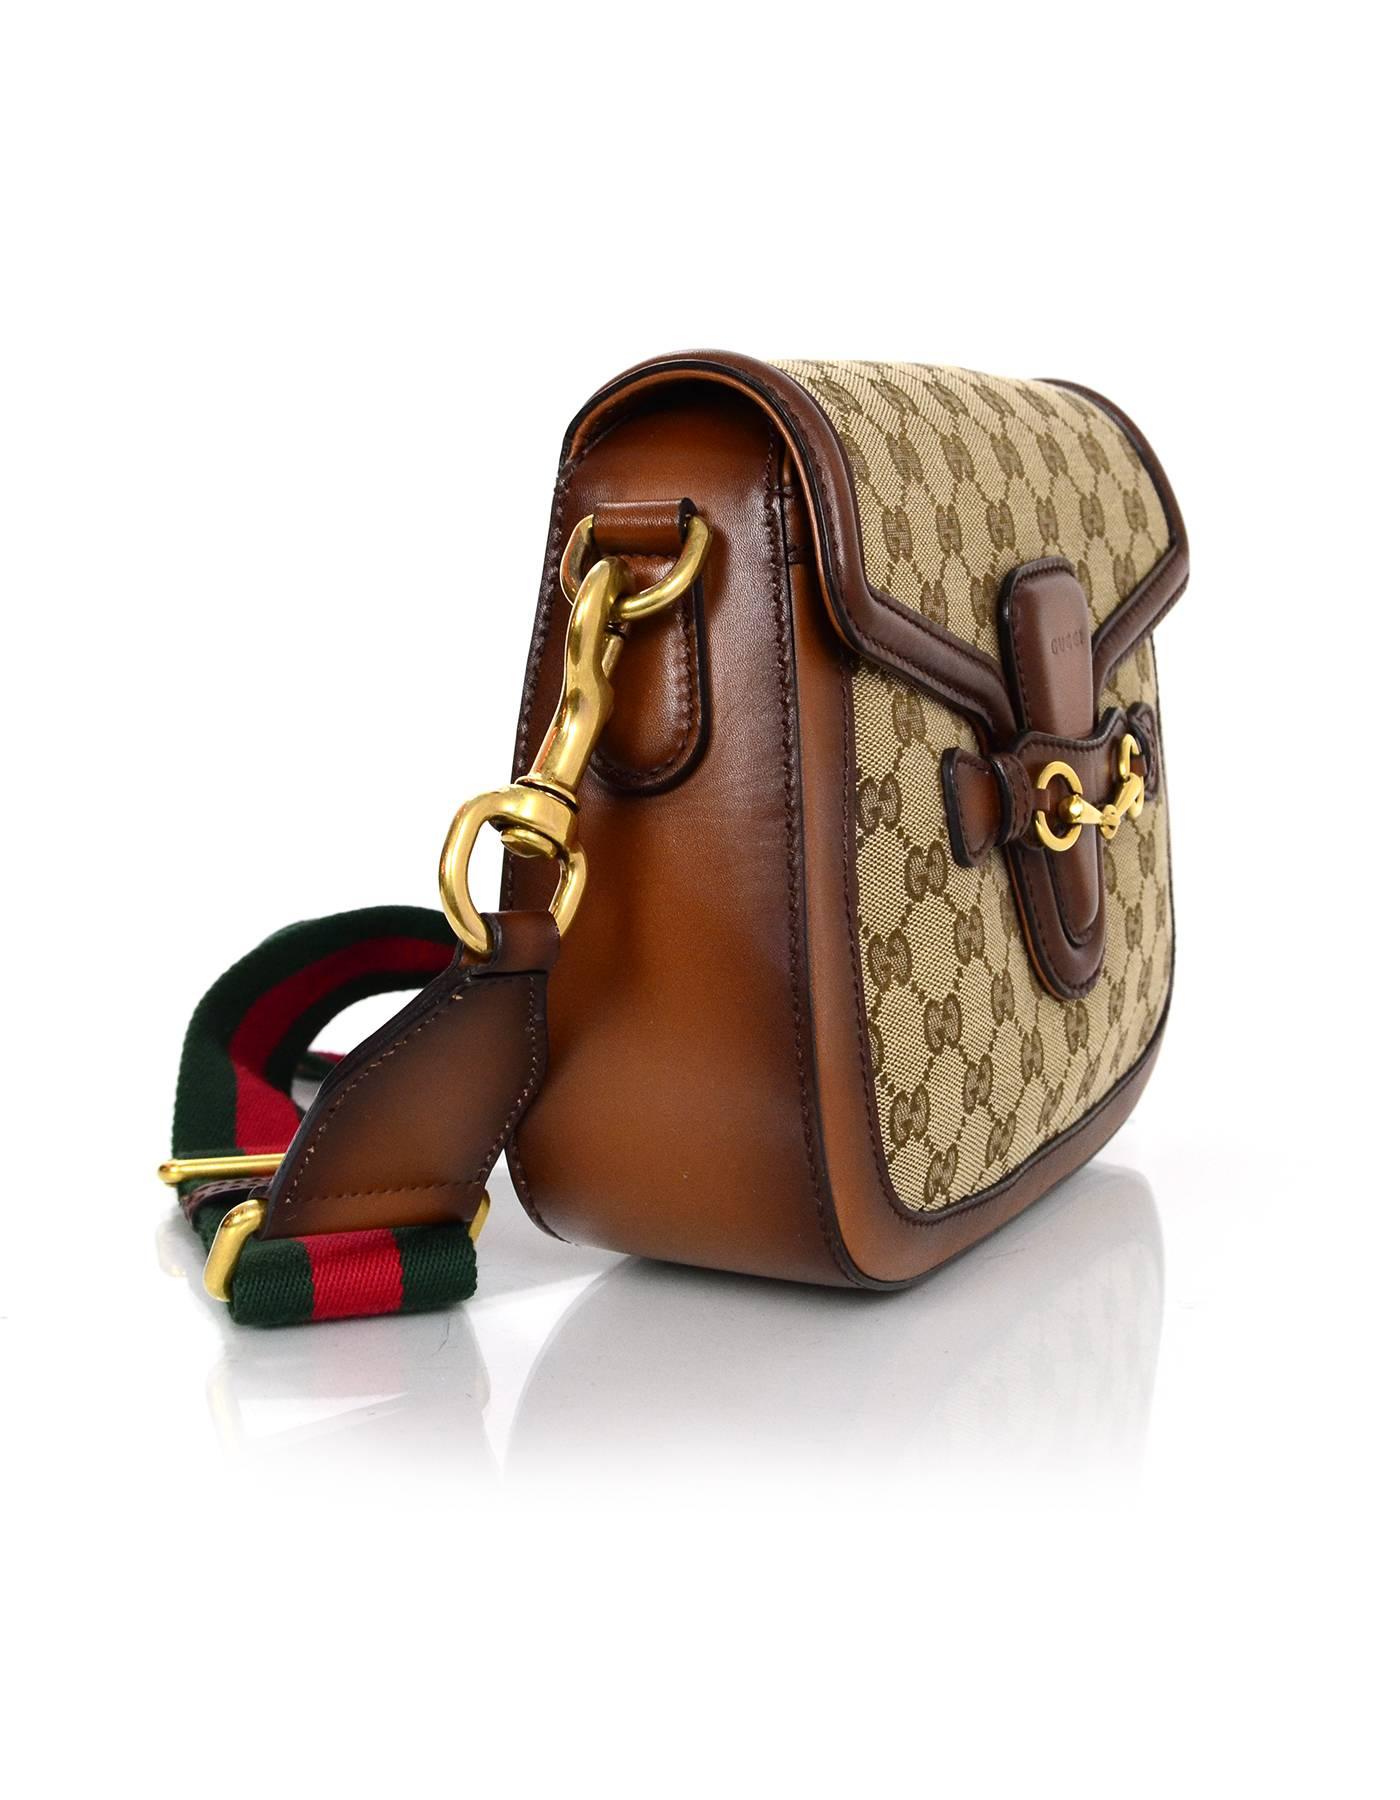 100% Authentic Gucci Brown Medium Lady Web Crossbody. Features brown stained leather trim with classic goldtone horsebit detail. Adjustable web red and green stripe strap allows bag to be worn on the shoulder or crossbody.

Made In: Italy
Color: